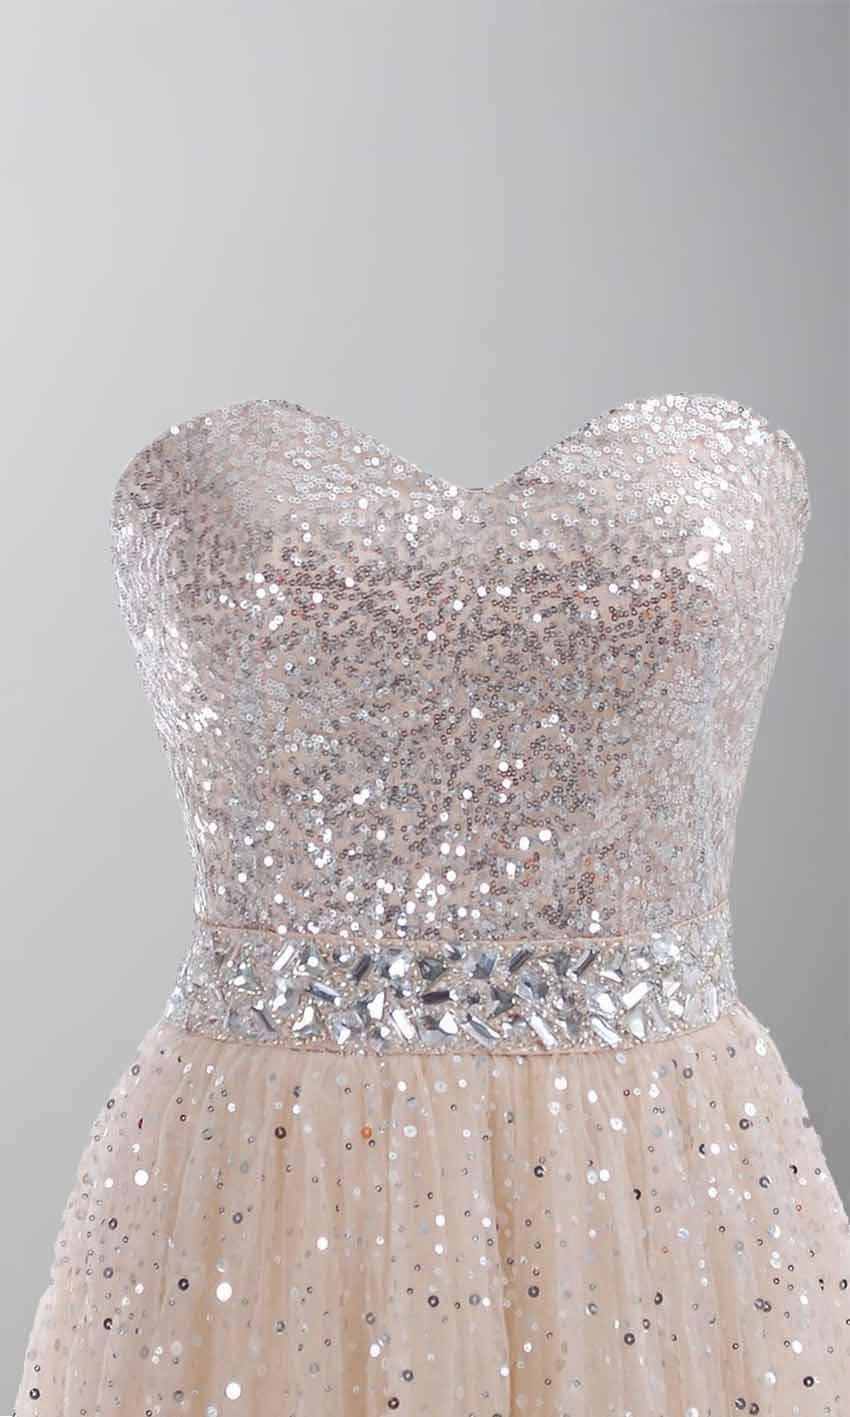 Wedding - Champagne Sequin Sweetheart Long Prom Gowns KSP254 [KSP254] - £109.00 : Cheap Prom Dresses Uk, Bridesmaid Dresses, 2014 Prom & Evening Dresses, Look for cheap elegant prom dresses 2014, cocktail gowns, or dresses for special occasions? kissprom.co.uk offe